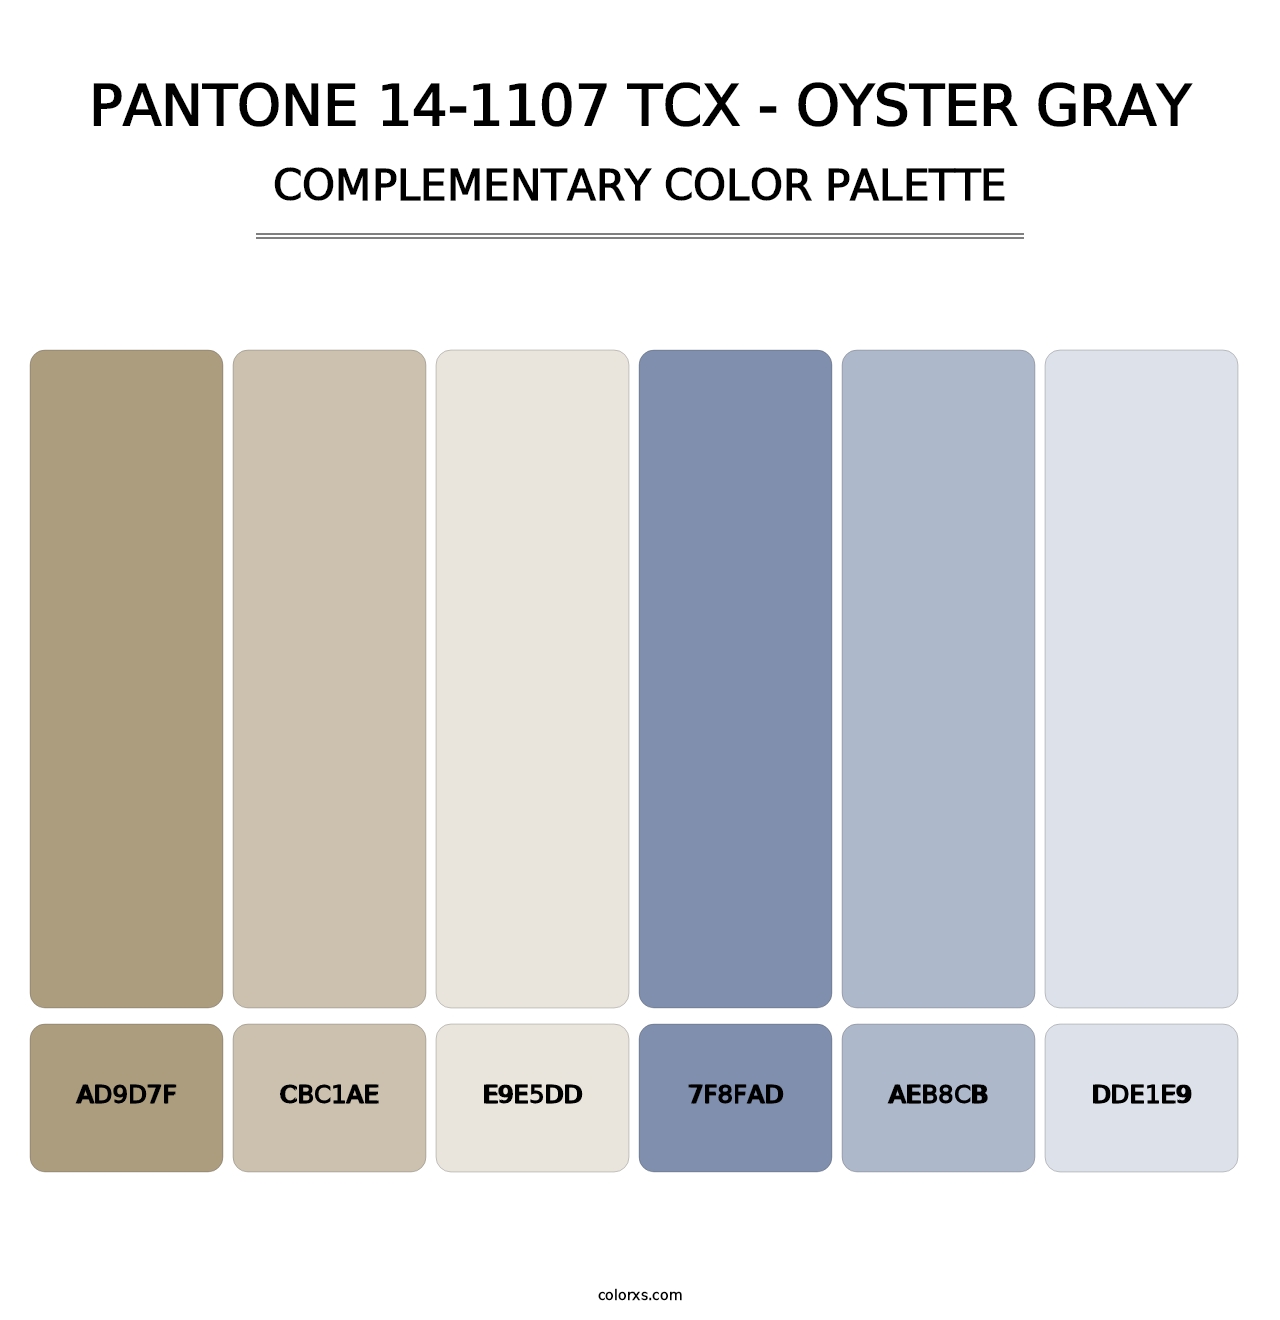 PANTONE 14-1107 TCX - Oyster Gray - Complementary Color Palette